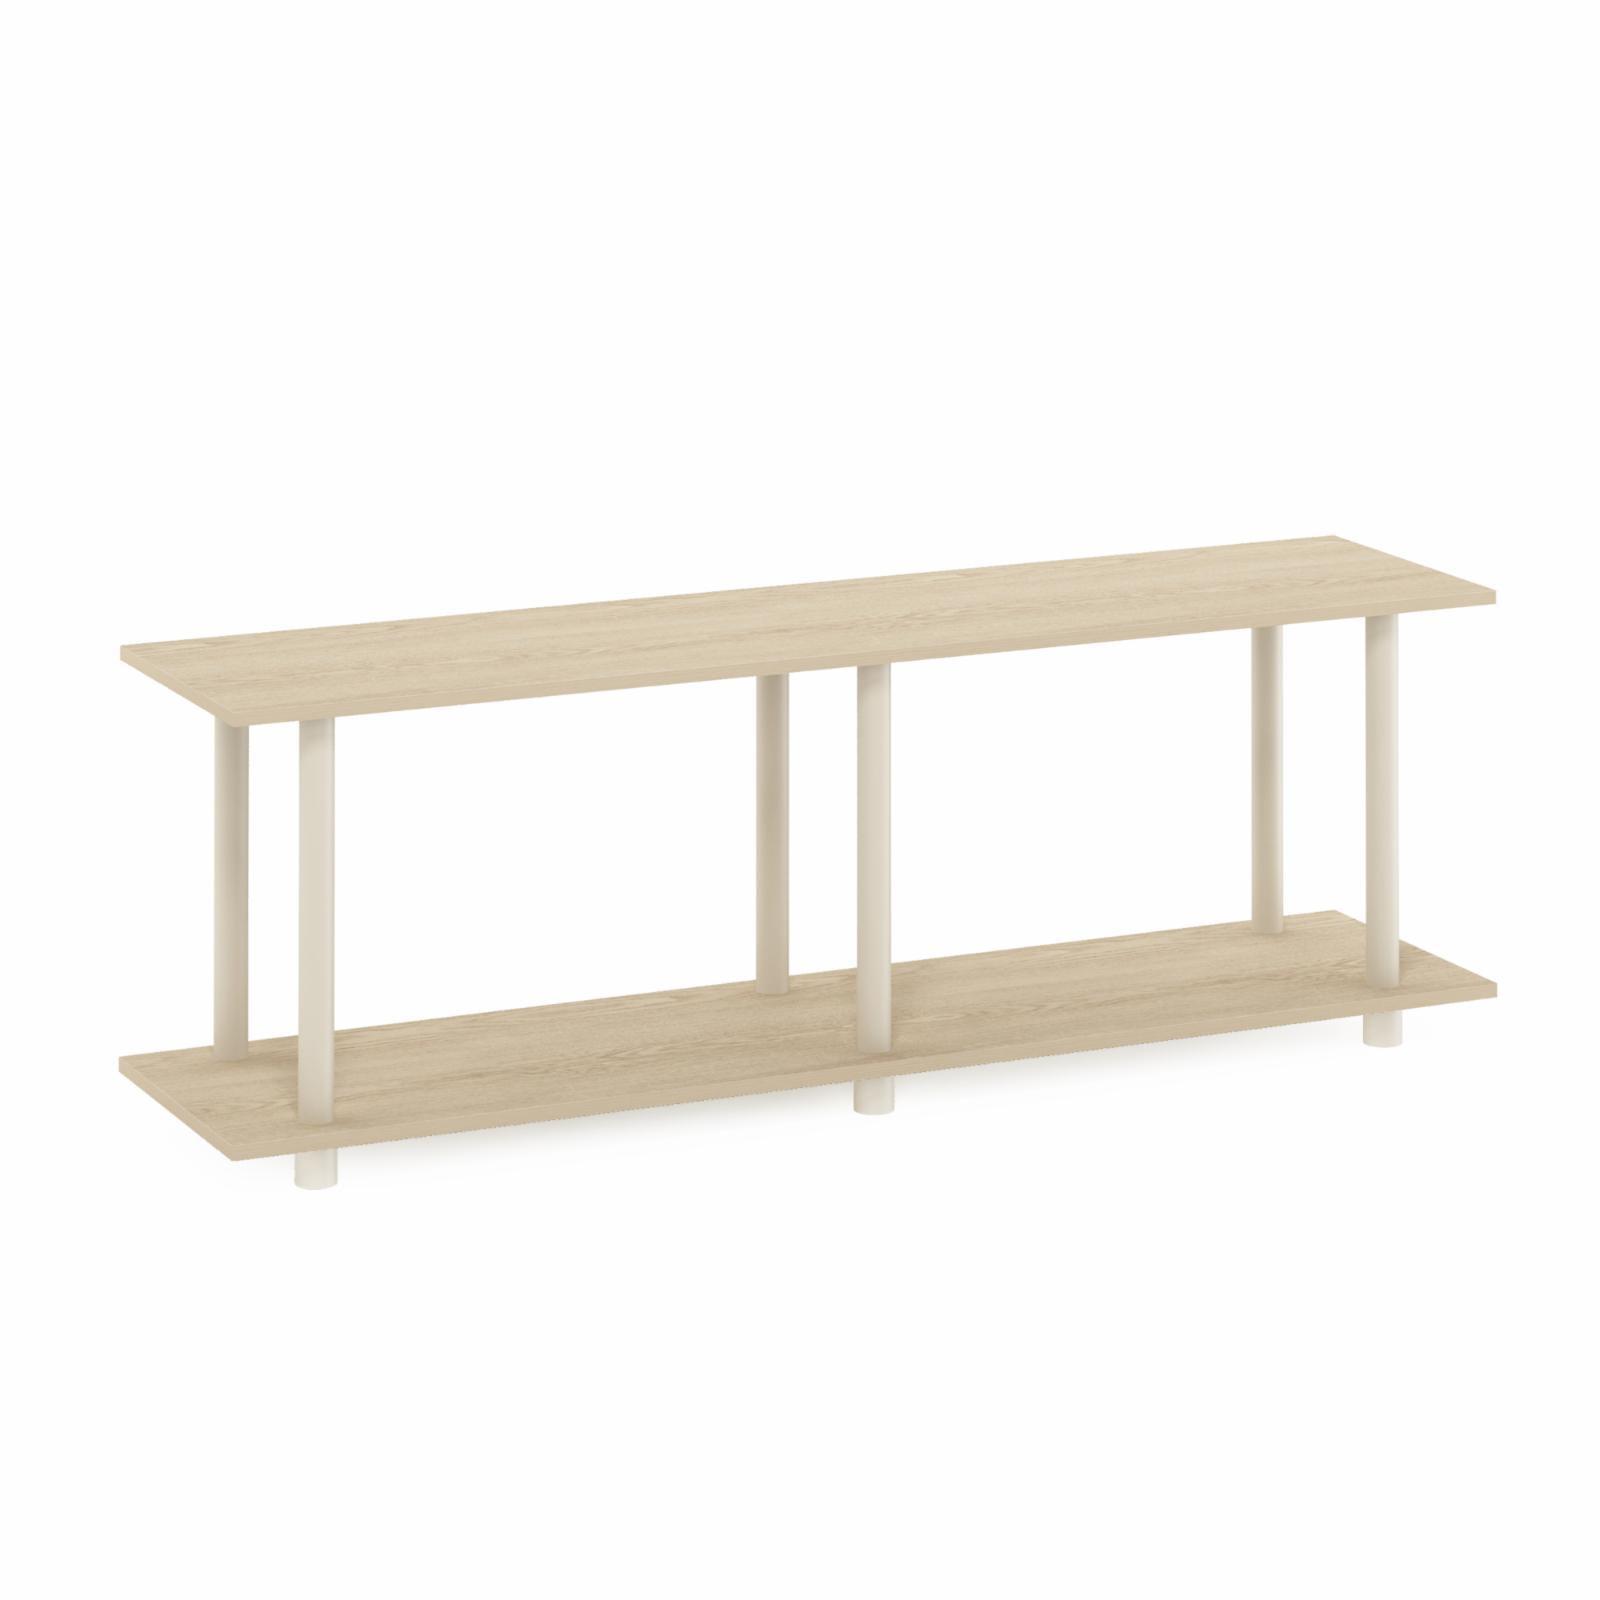 Bauhaus Oak and Beige Modern Rectangle Coffee Table with Lower Shelf